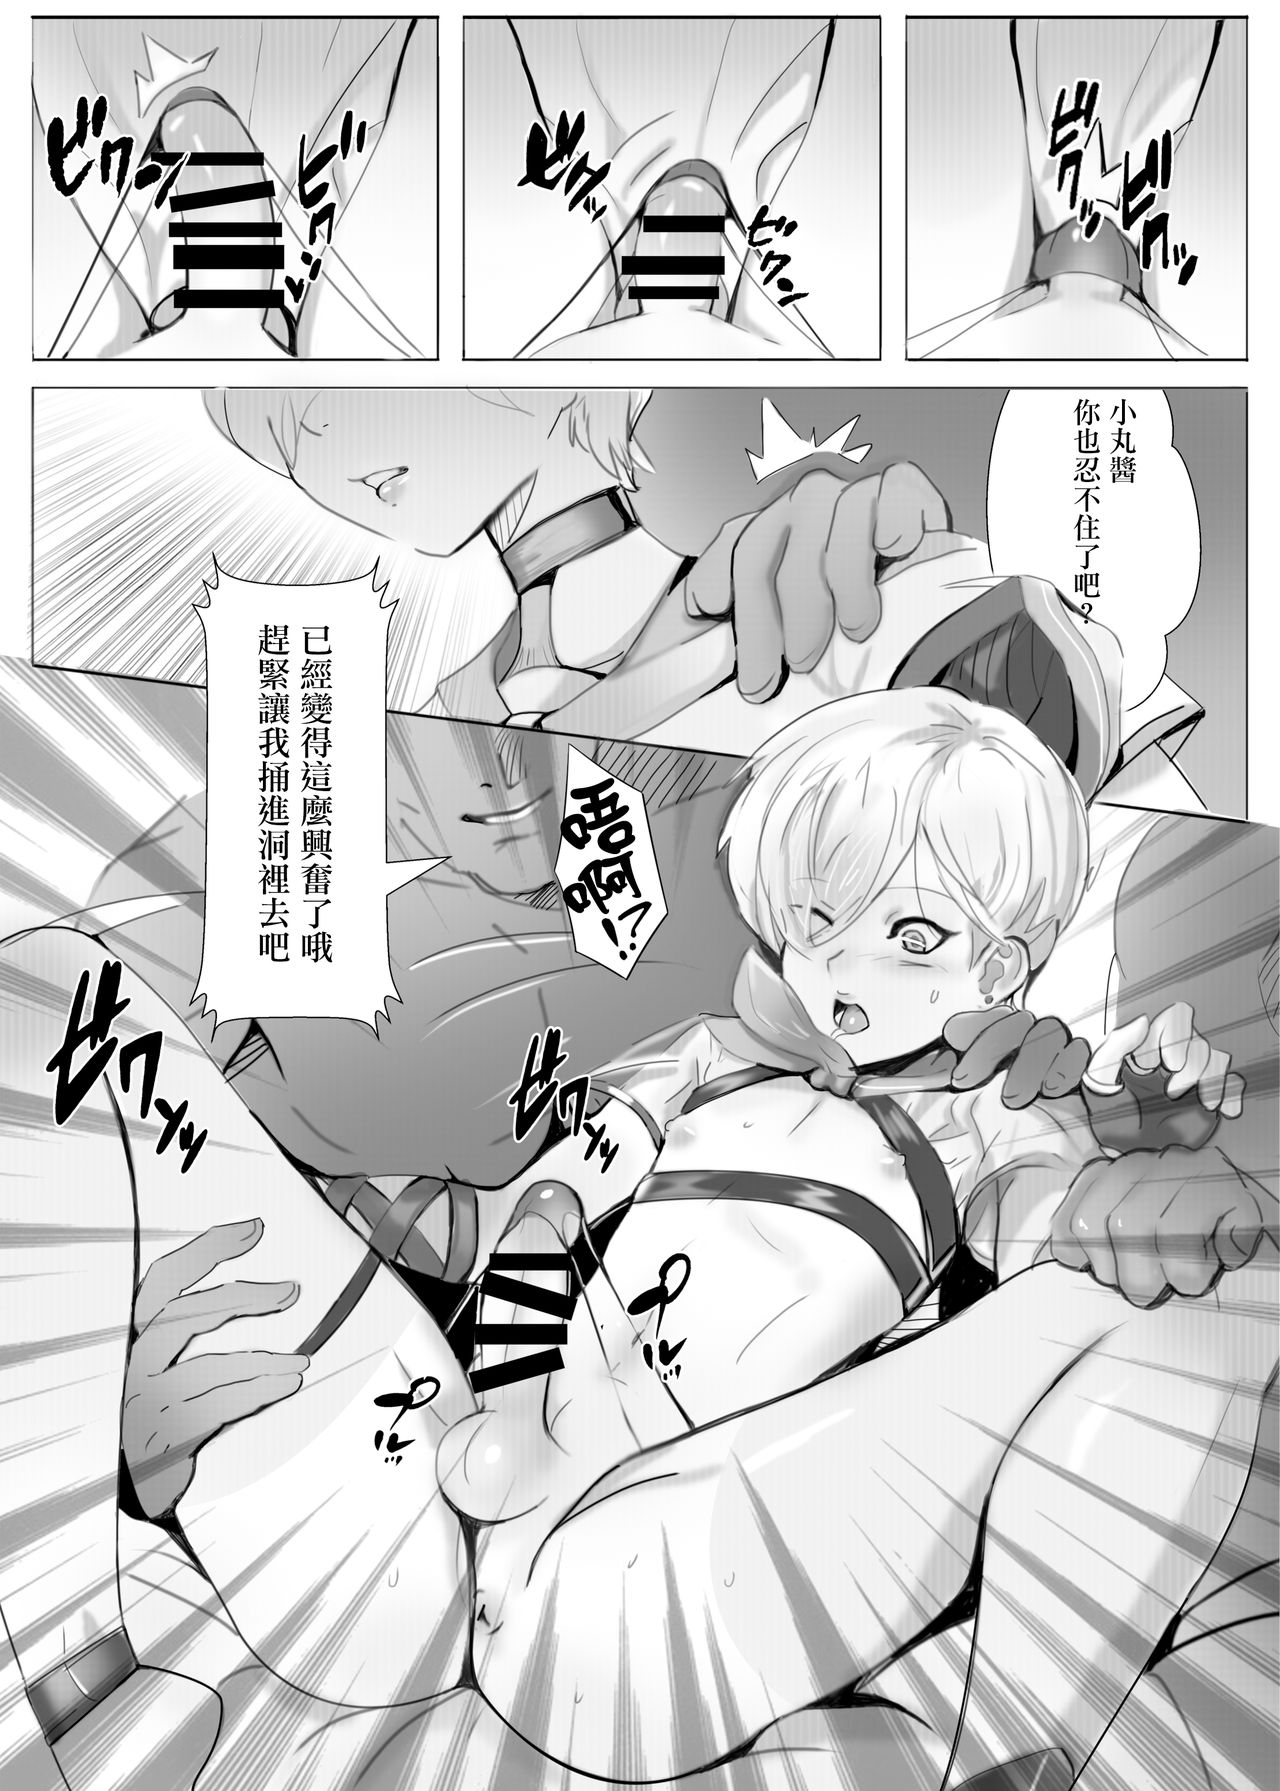 [Eight Million Halls (Chawanmushi)] Welcome to sailor port [Chinese] [瑞树汉化组] [Digital] page 8 full